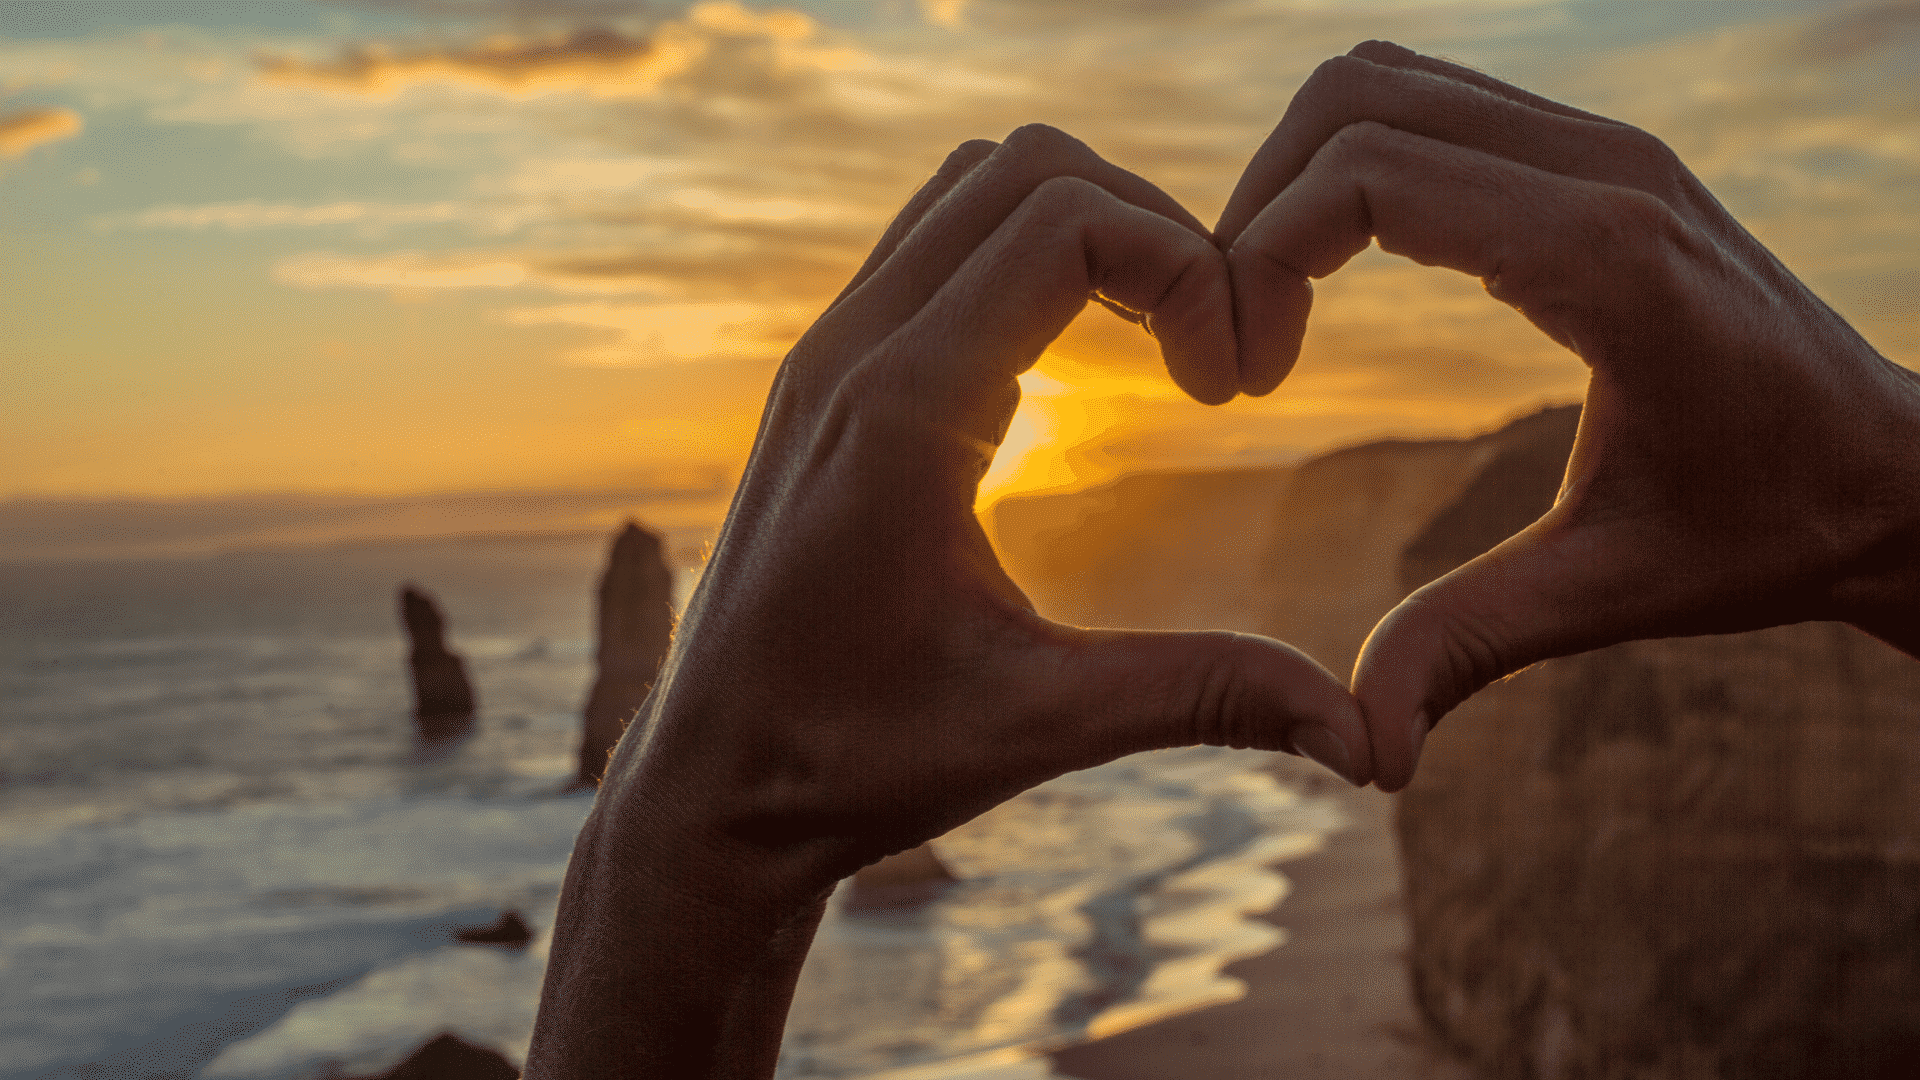 A hand making a heart shape to capture the sunset in Australia